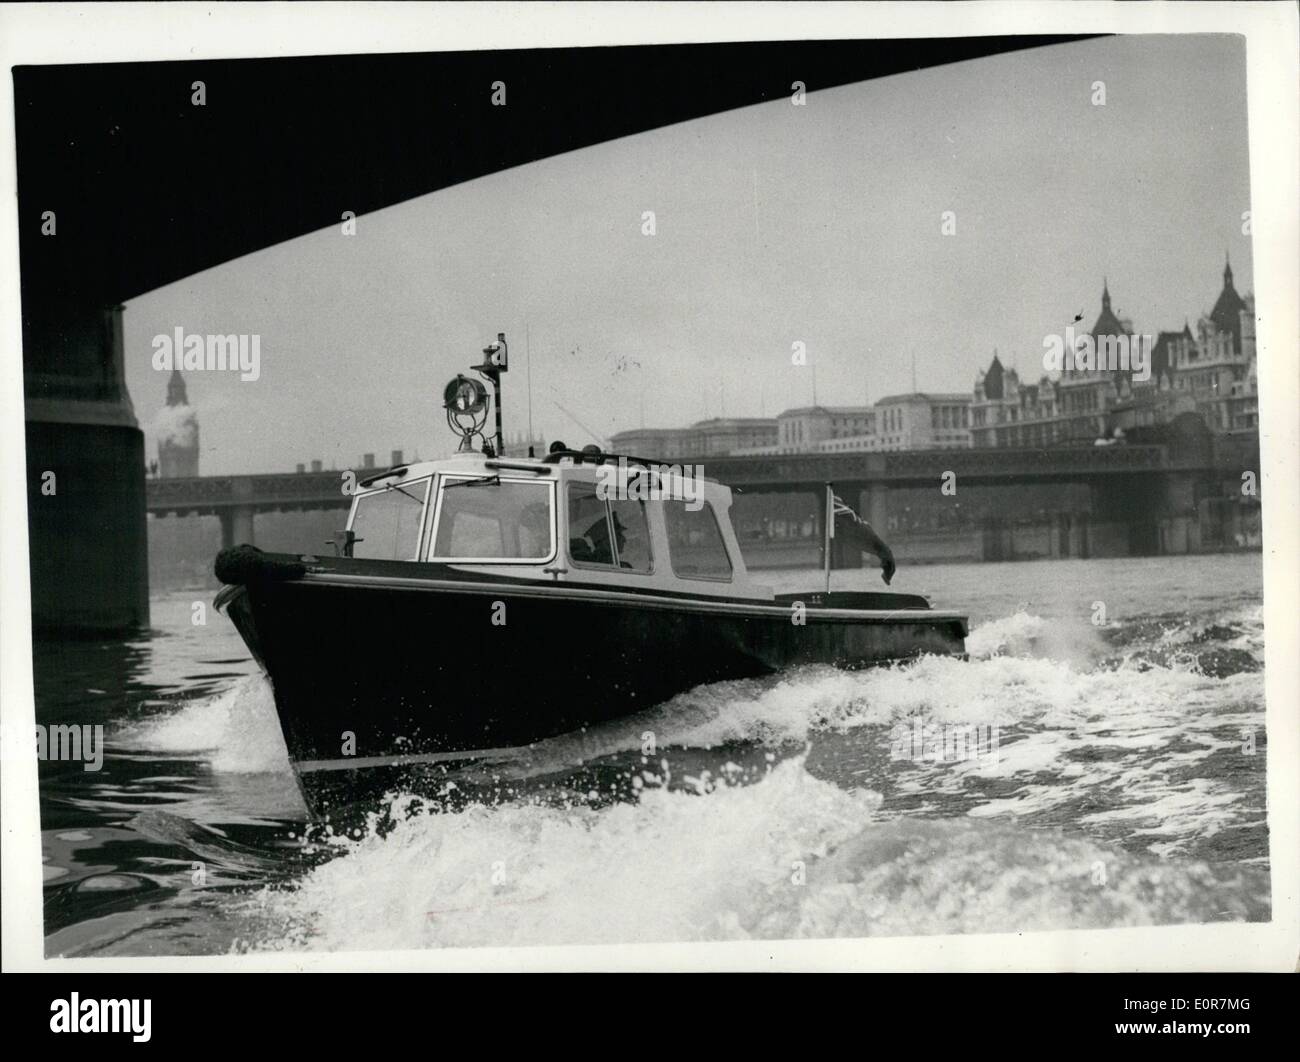 May 05, 1958 - NEW FIBRE GLASS POLICE LAUNCH. A new fibre glass Police launch was handed over for today at the Waterloo Police Pier. It is 30-feet long and powered by a Diesel engine, with a speed of 12 5/4 knots. It is moulded in two halves and bolted to an alluminium alloy keel. Keystone Photo Shows:- View of the new fibre glass police launch, seen at speed after being handed over for duty today. Stock Photo